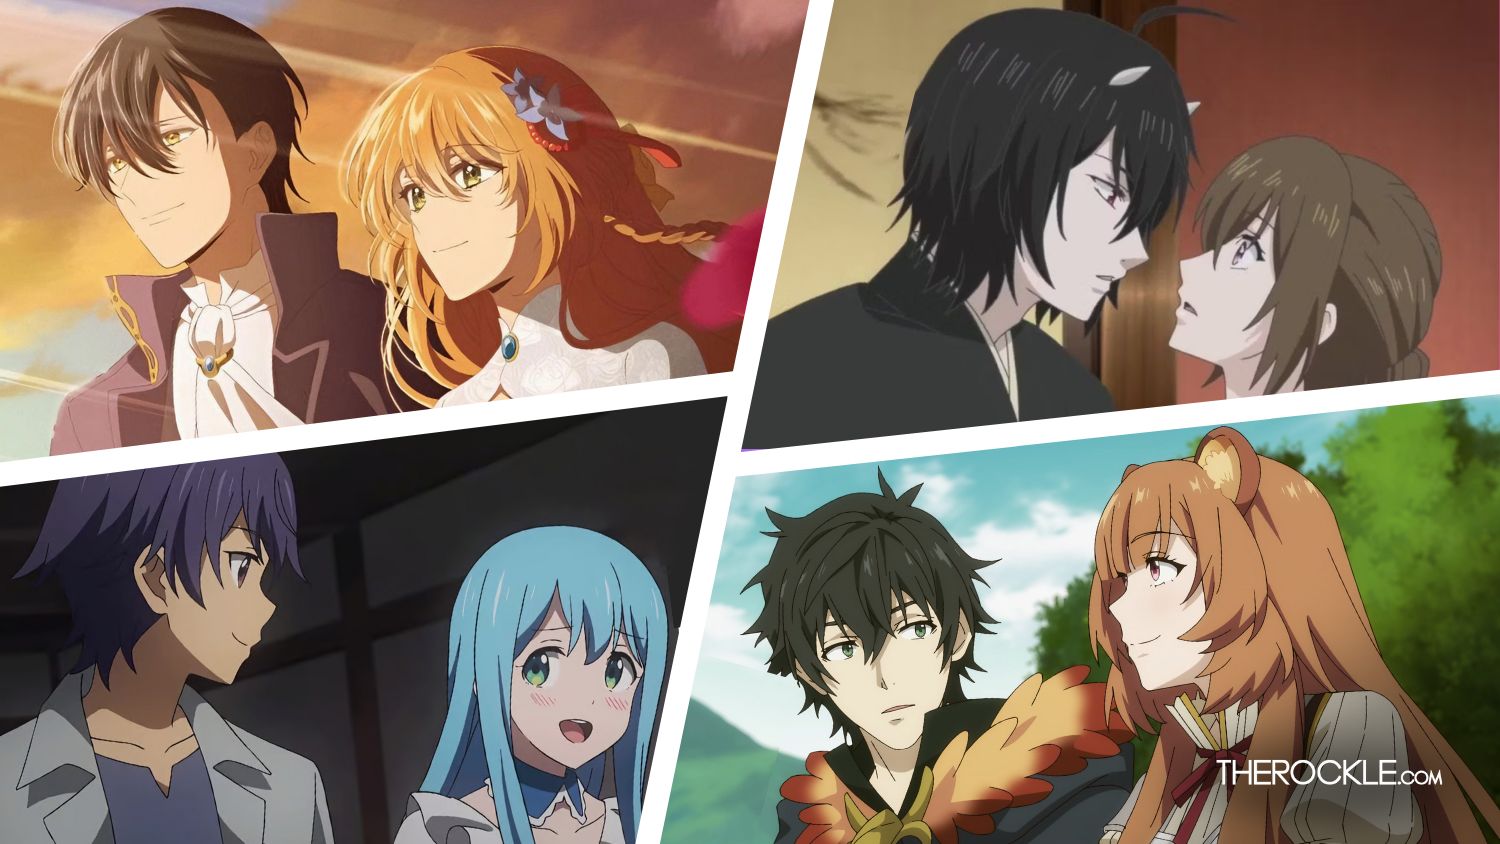 A collage of couples from Isekai romance anime